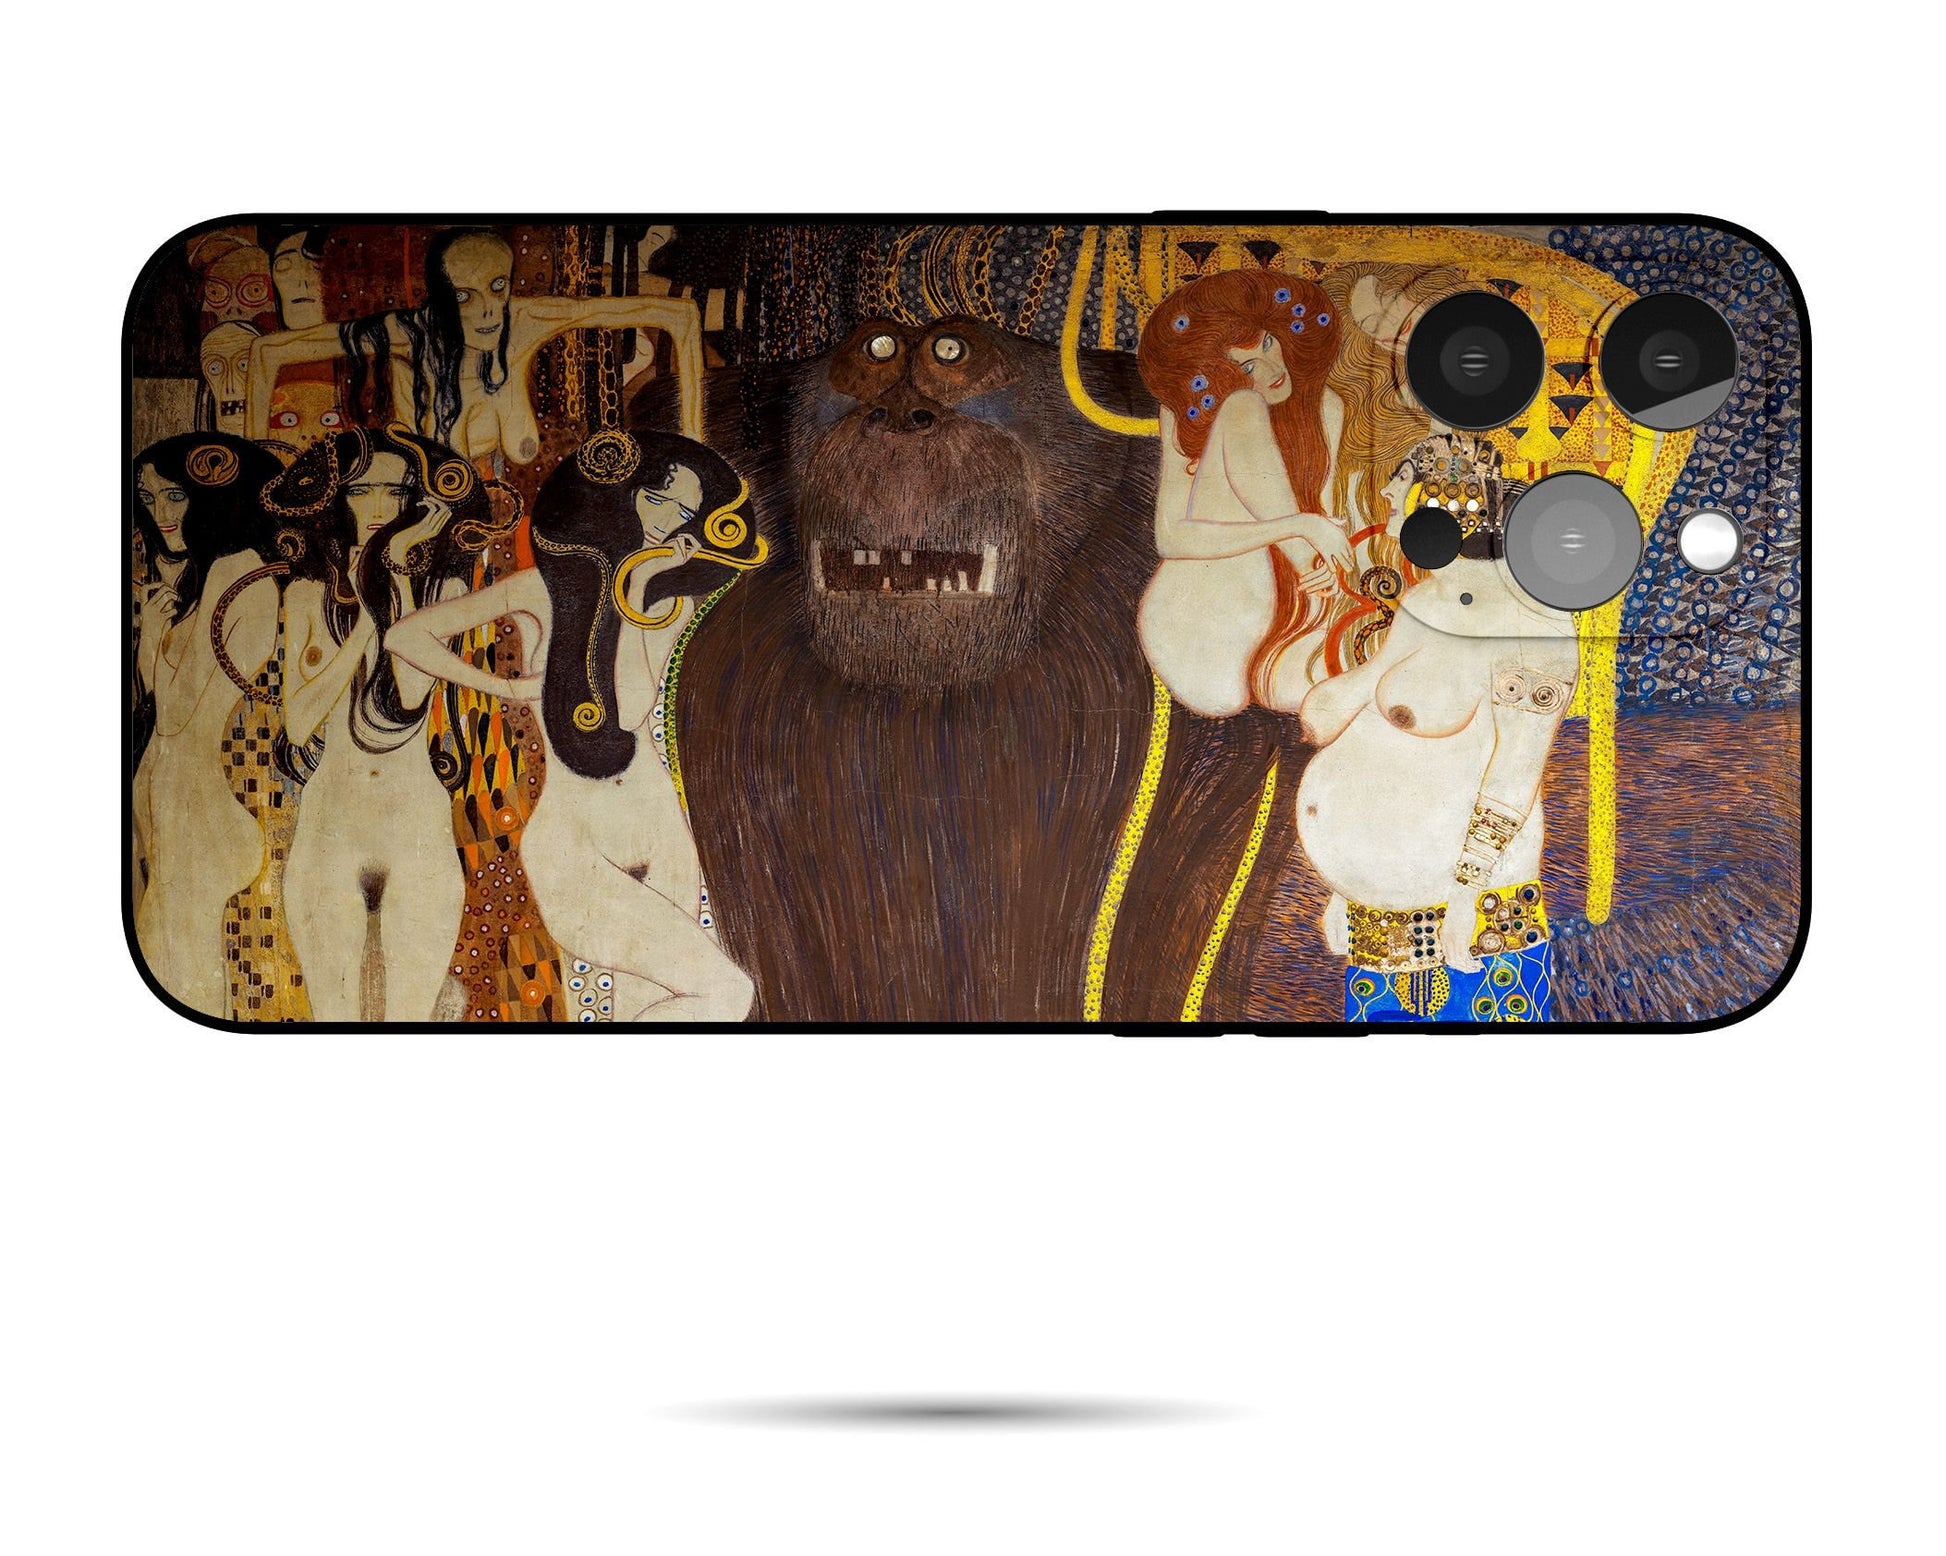 Iphone Case Of Gustav Klimt Painting Beethoven Frieze-The Hostile Powers, Iphone 8 Plus Case, Aesthetic Iphone, Iphone Case Protective